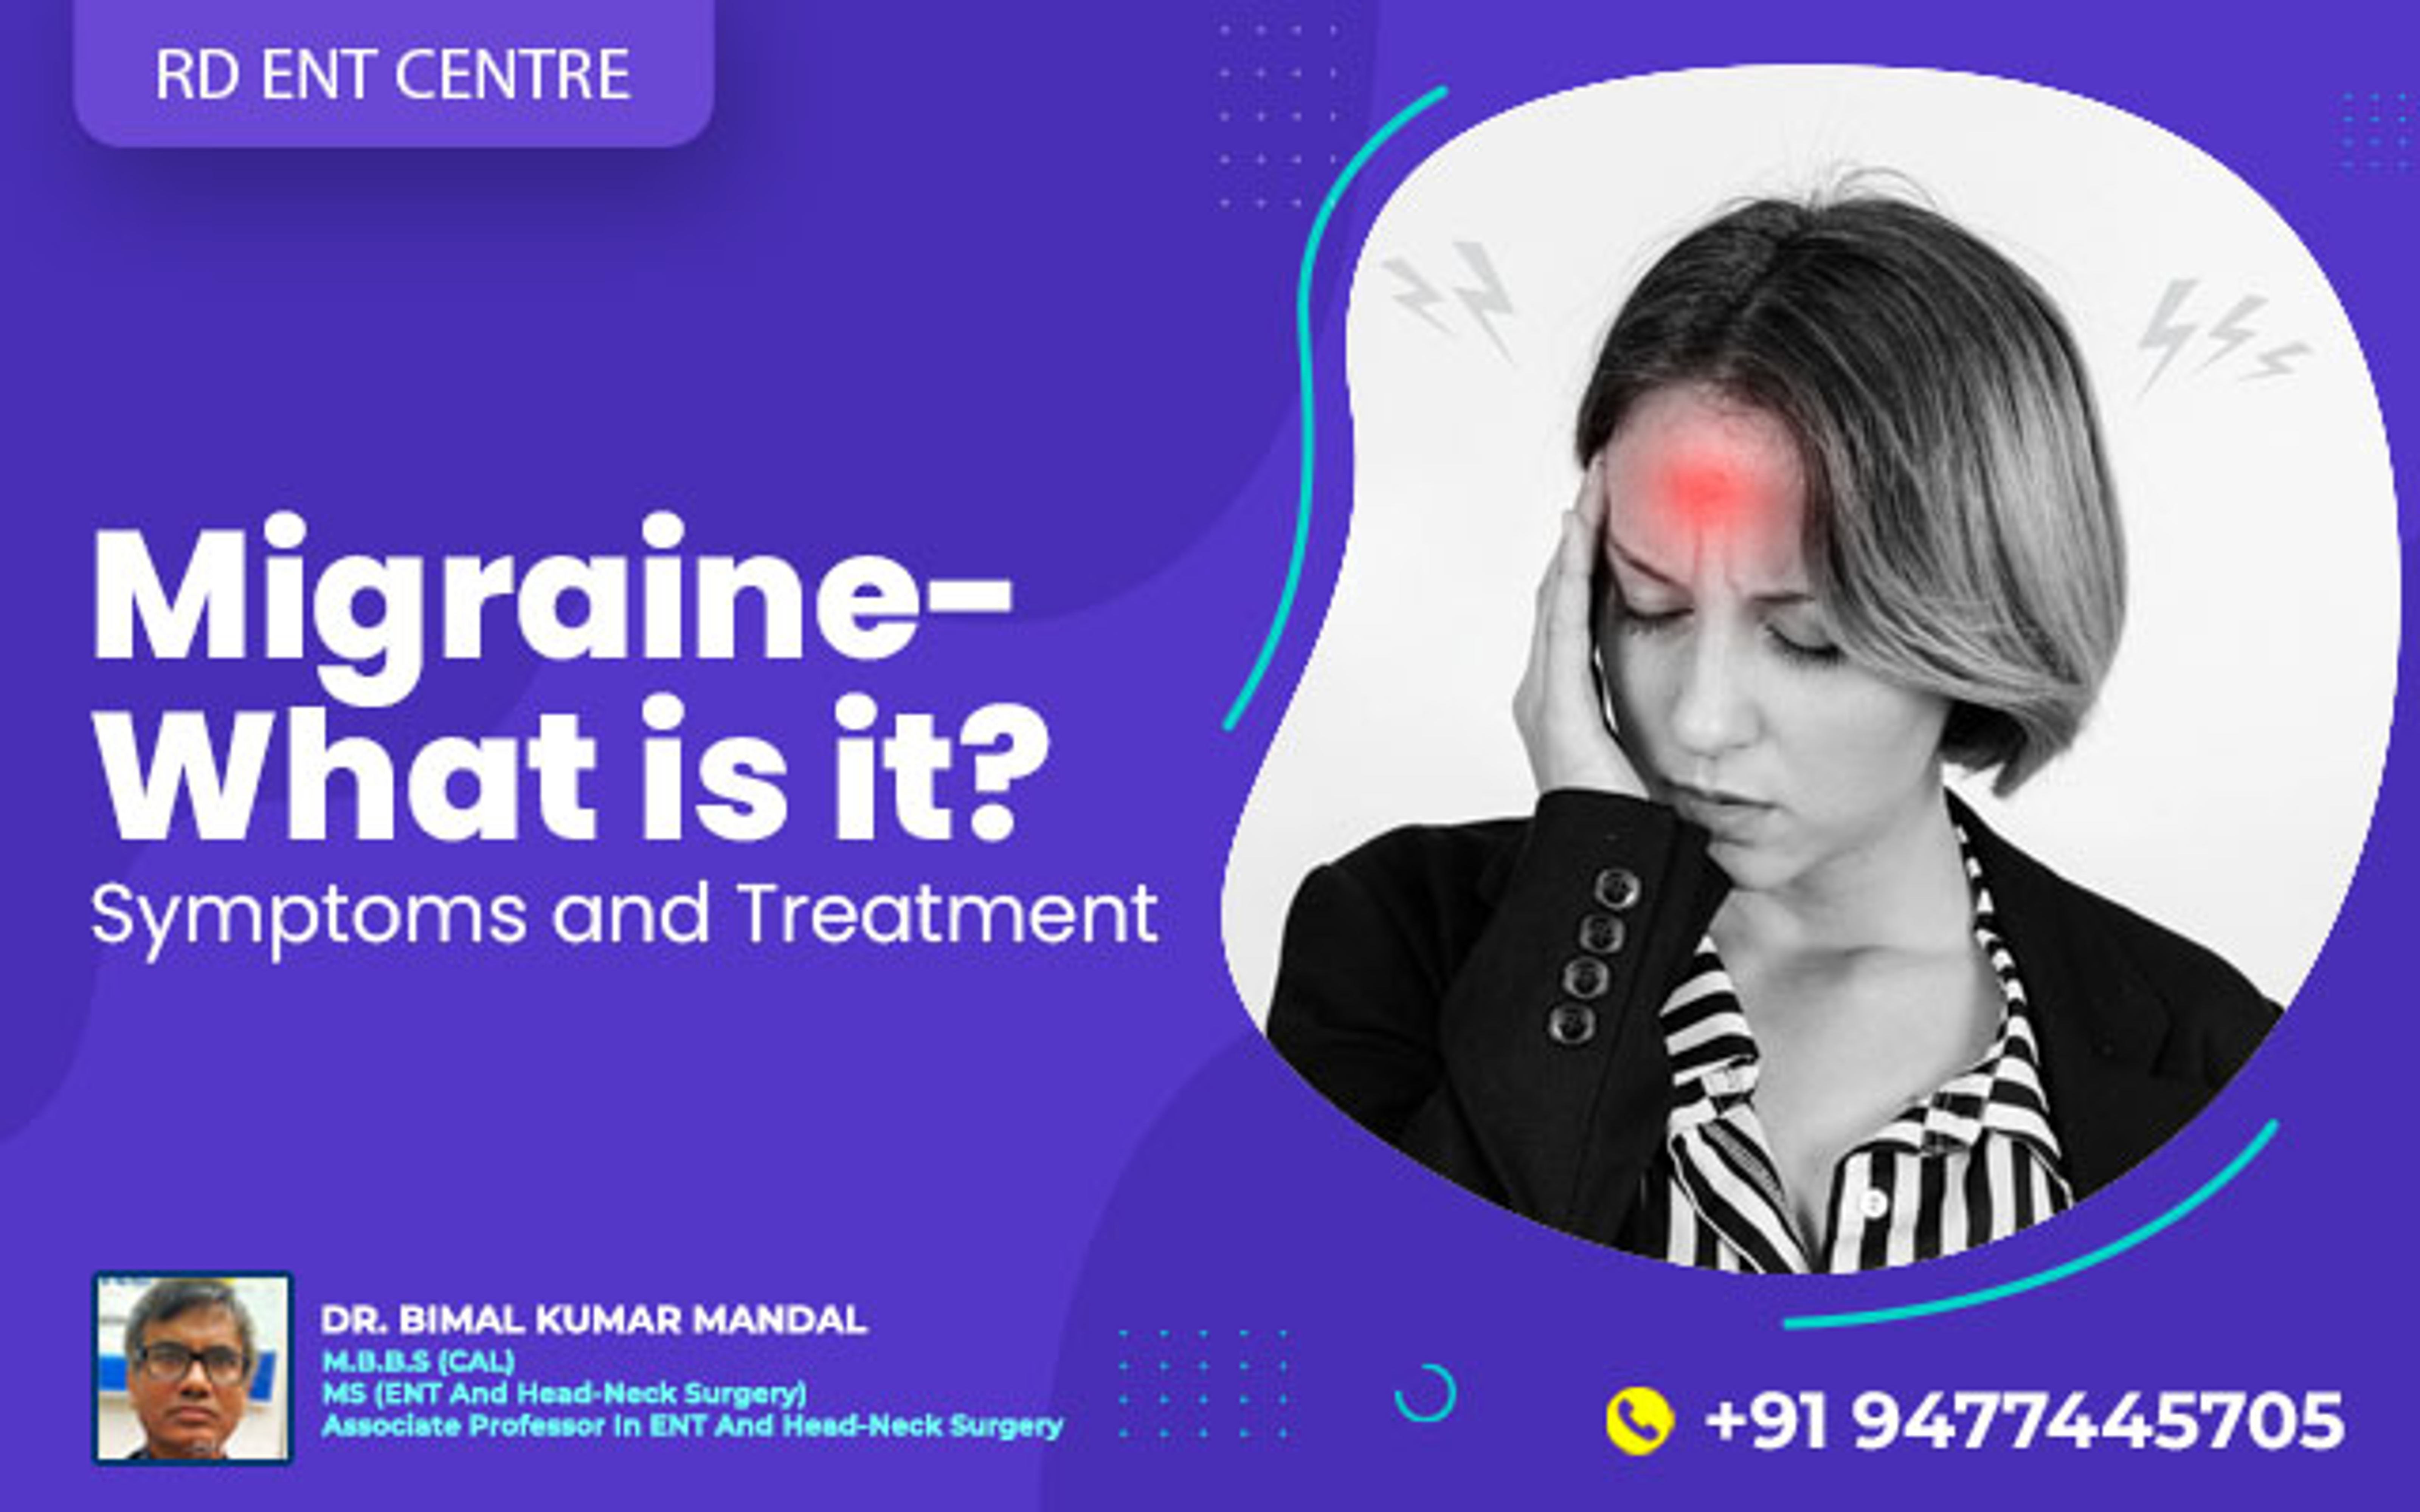 Migraine- What is it?- Symptoms and Treatment